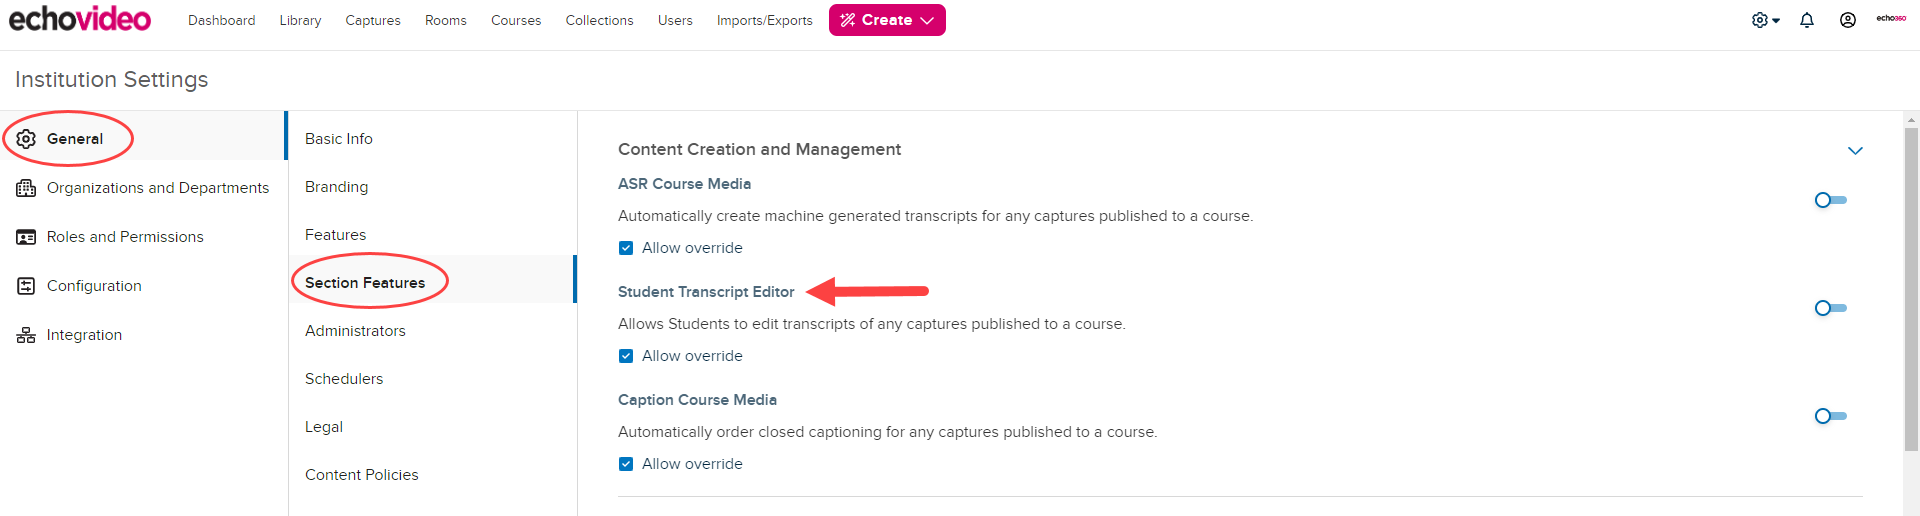 Institution Features with student transcript editing toggle identified for steps as described